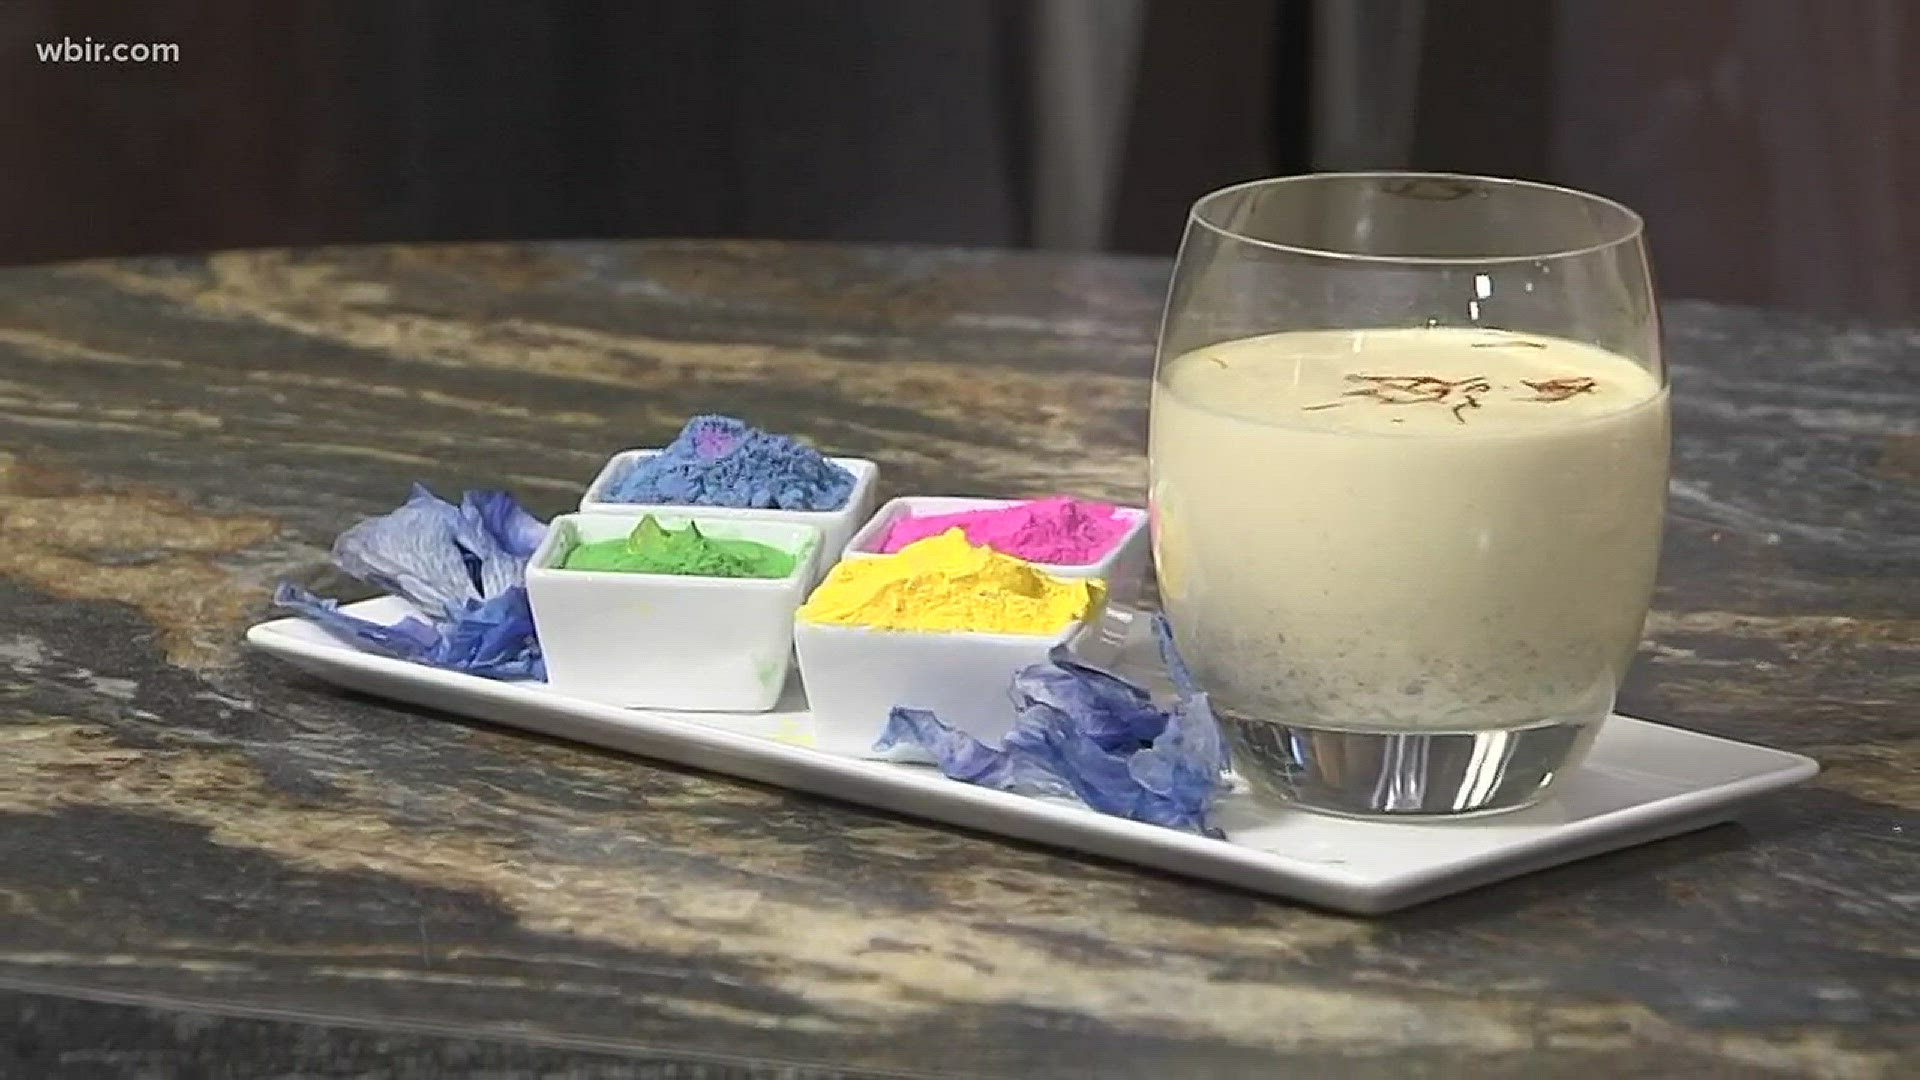 Smita Borole makes a cool and refreshing milk drink to celebrate the Holi festival of colors.